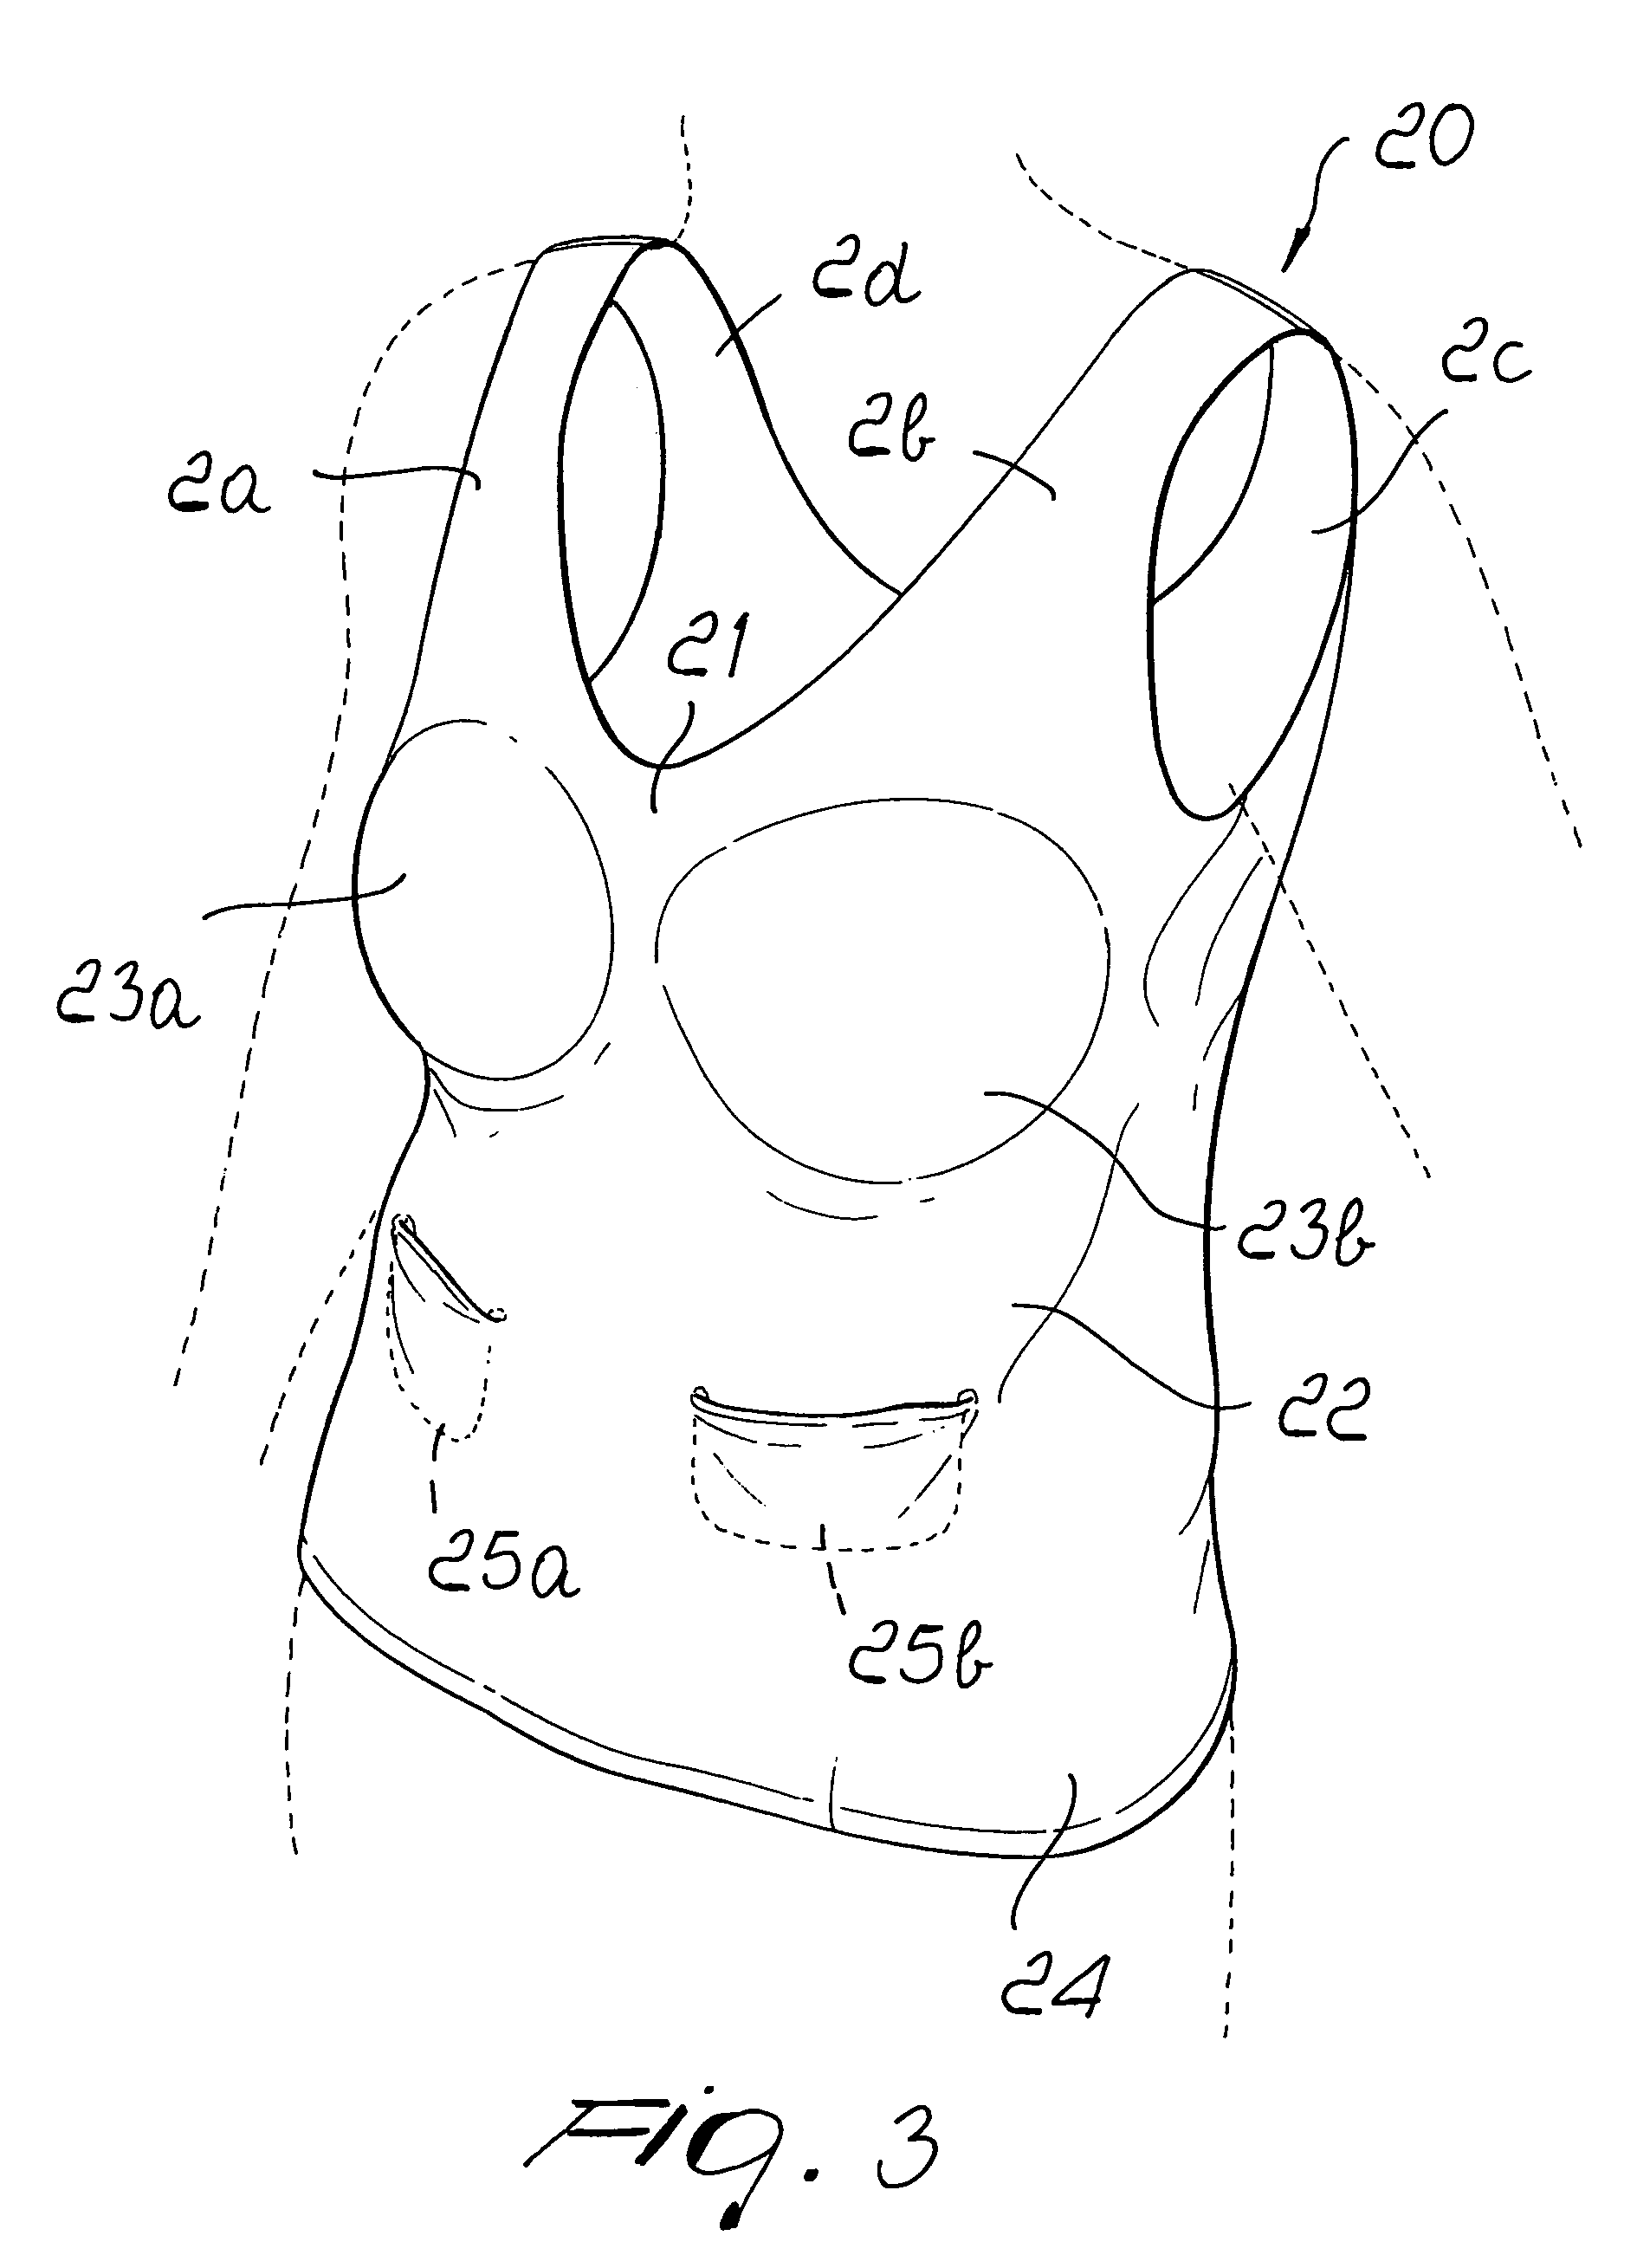 Method for manufacturing knitted articles for forming items of clothing, such as body suits, sleeveless tops, undershirts, bras, underpants or the like, without lateral seams, with a circular knitting machine